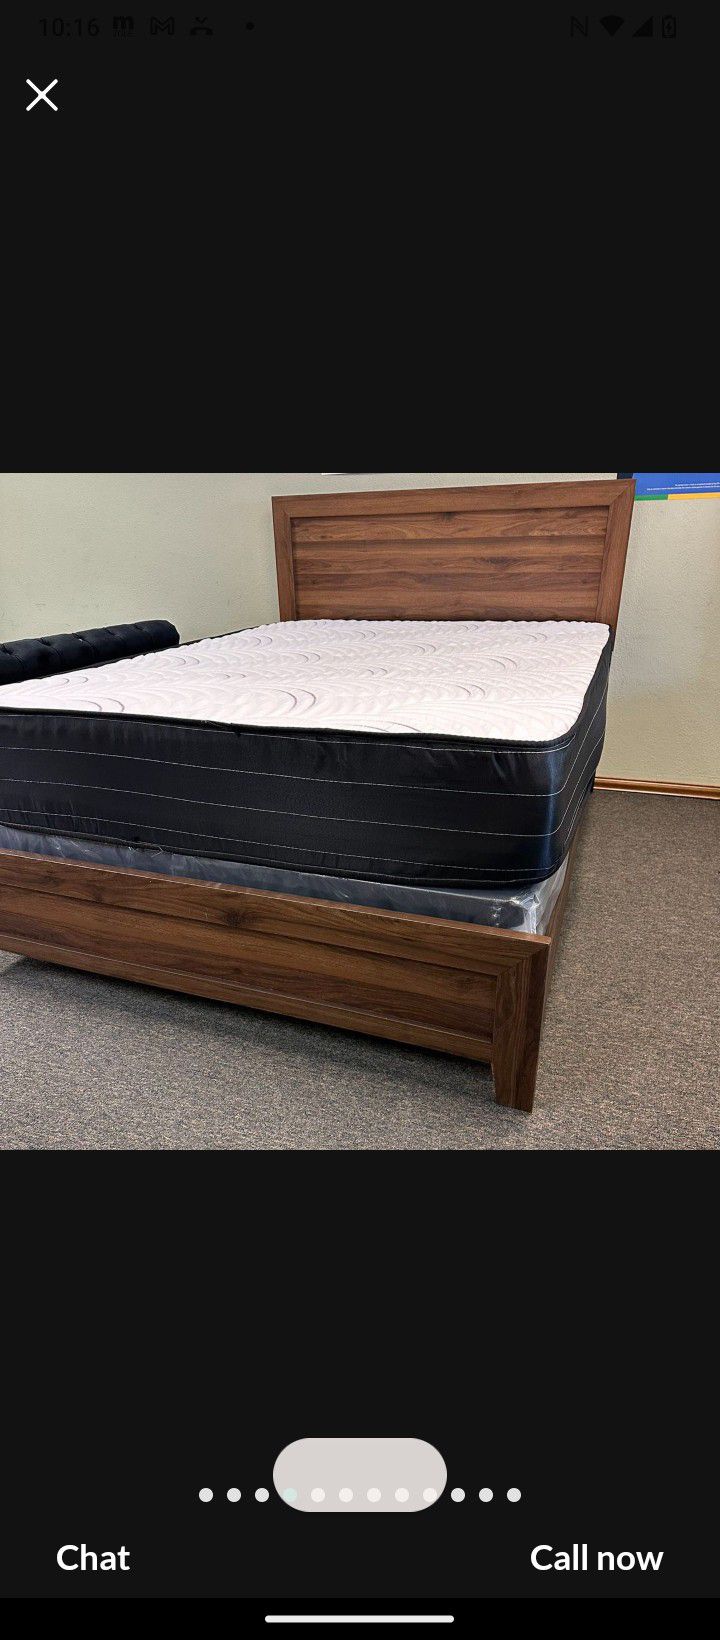 New Full Size Wood Bed With Mattress And Box spring Delivery Today 